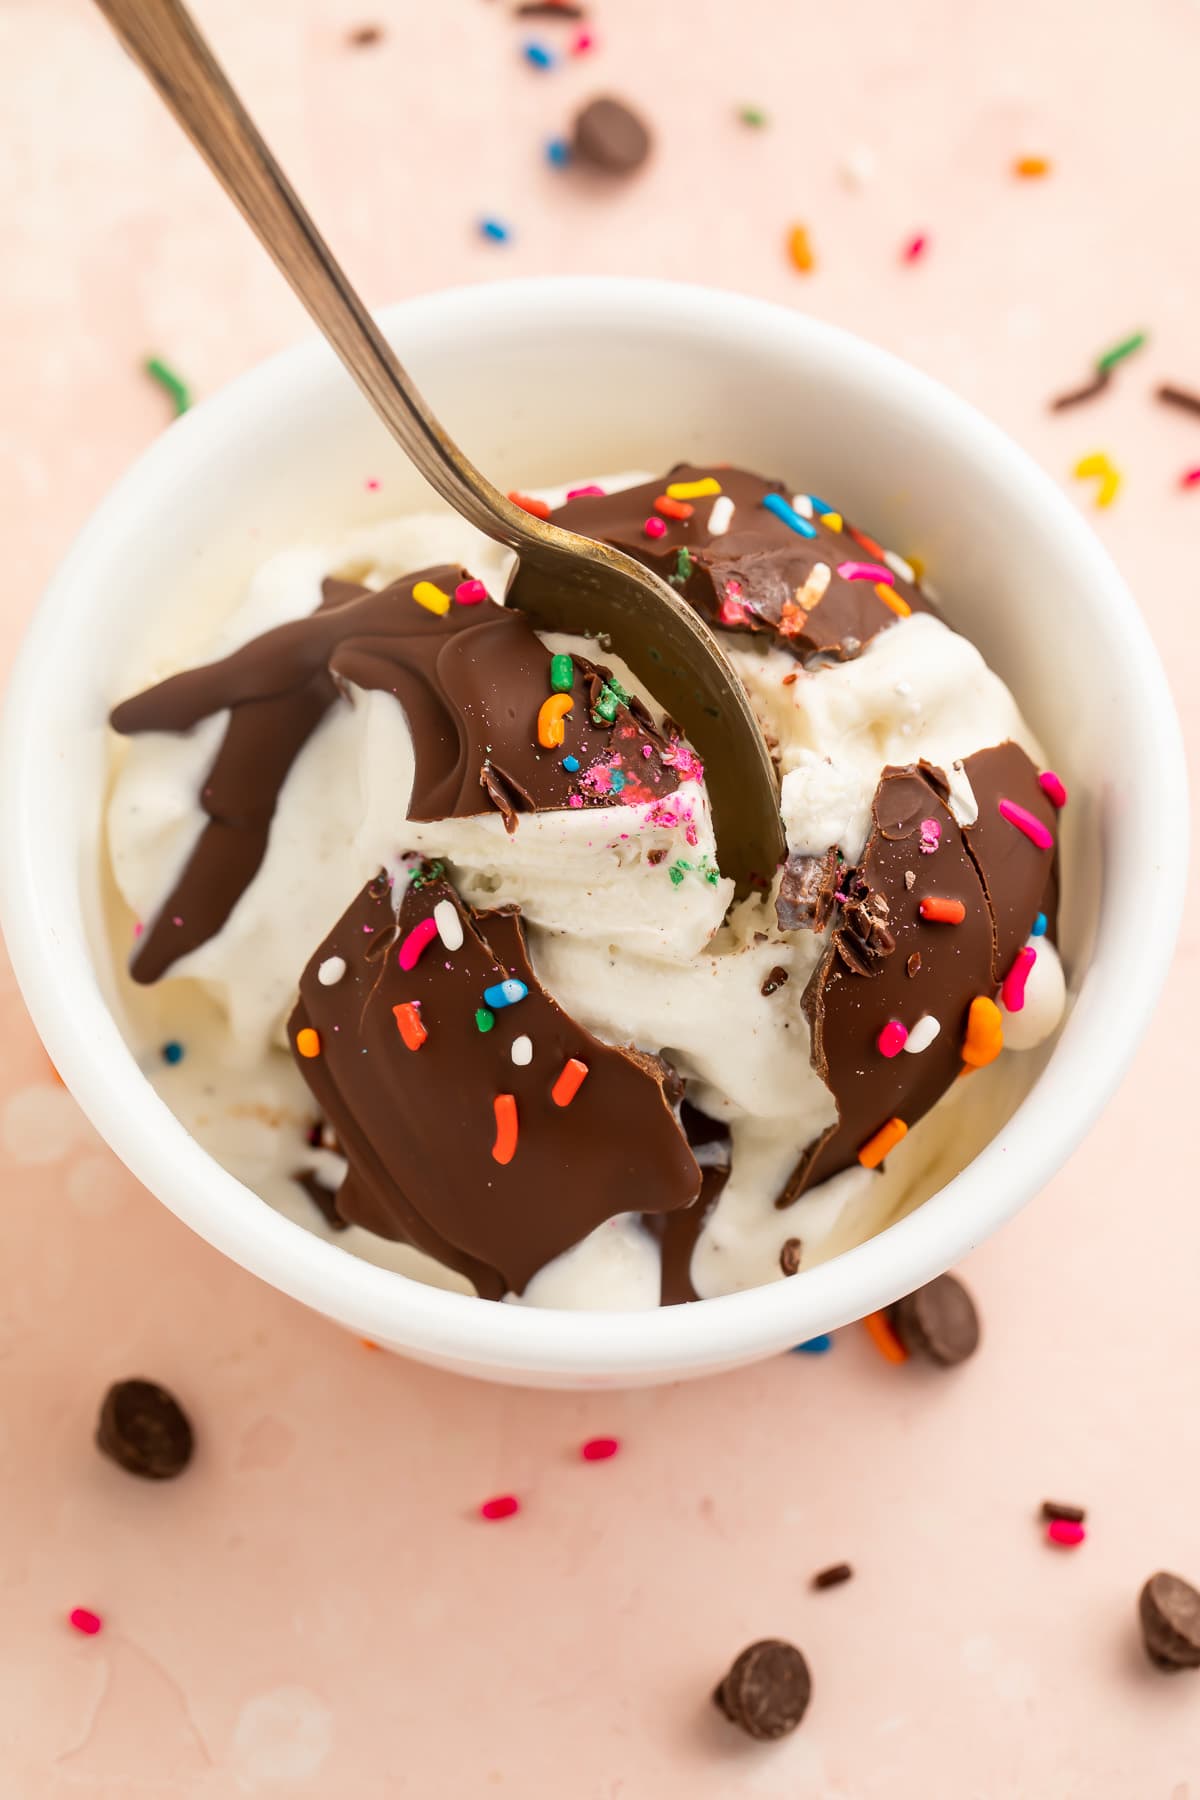 Broken chocolate magic shell topped with rainbow sprinkles over a bowl of vanilla ice cream.